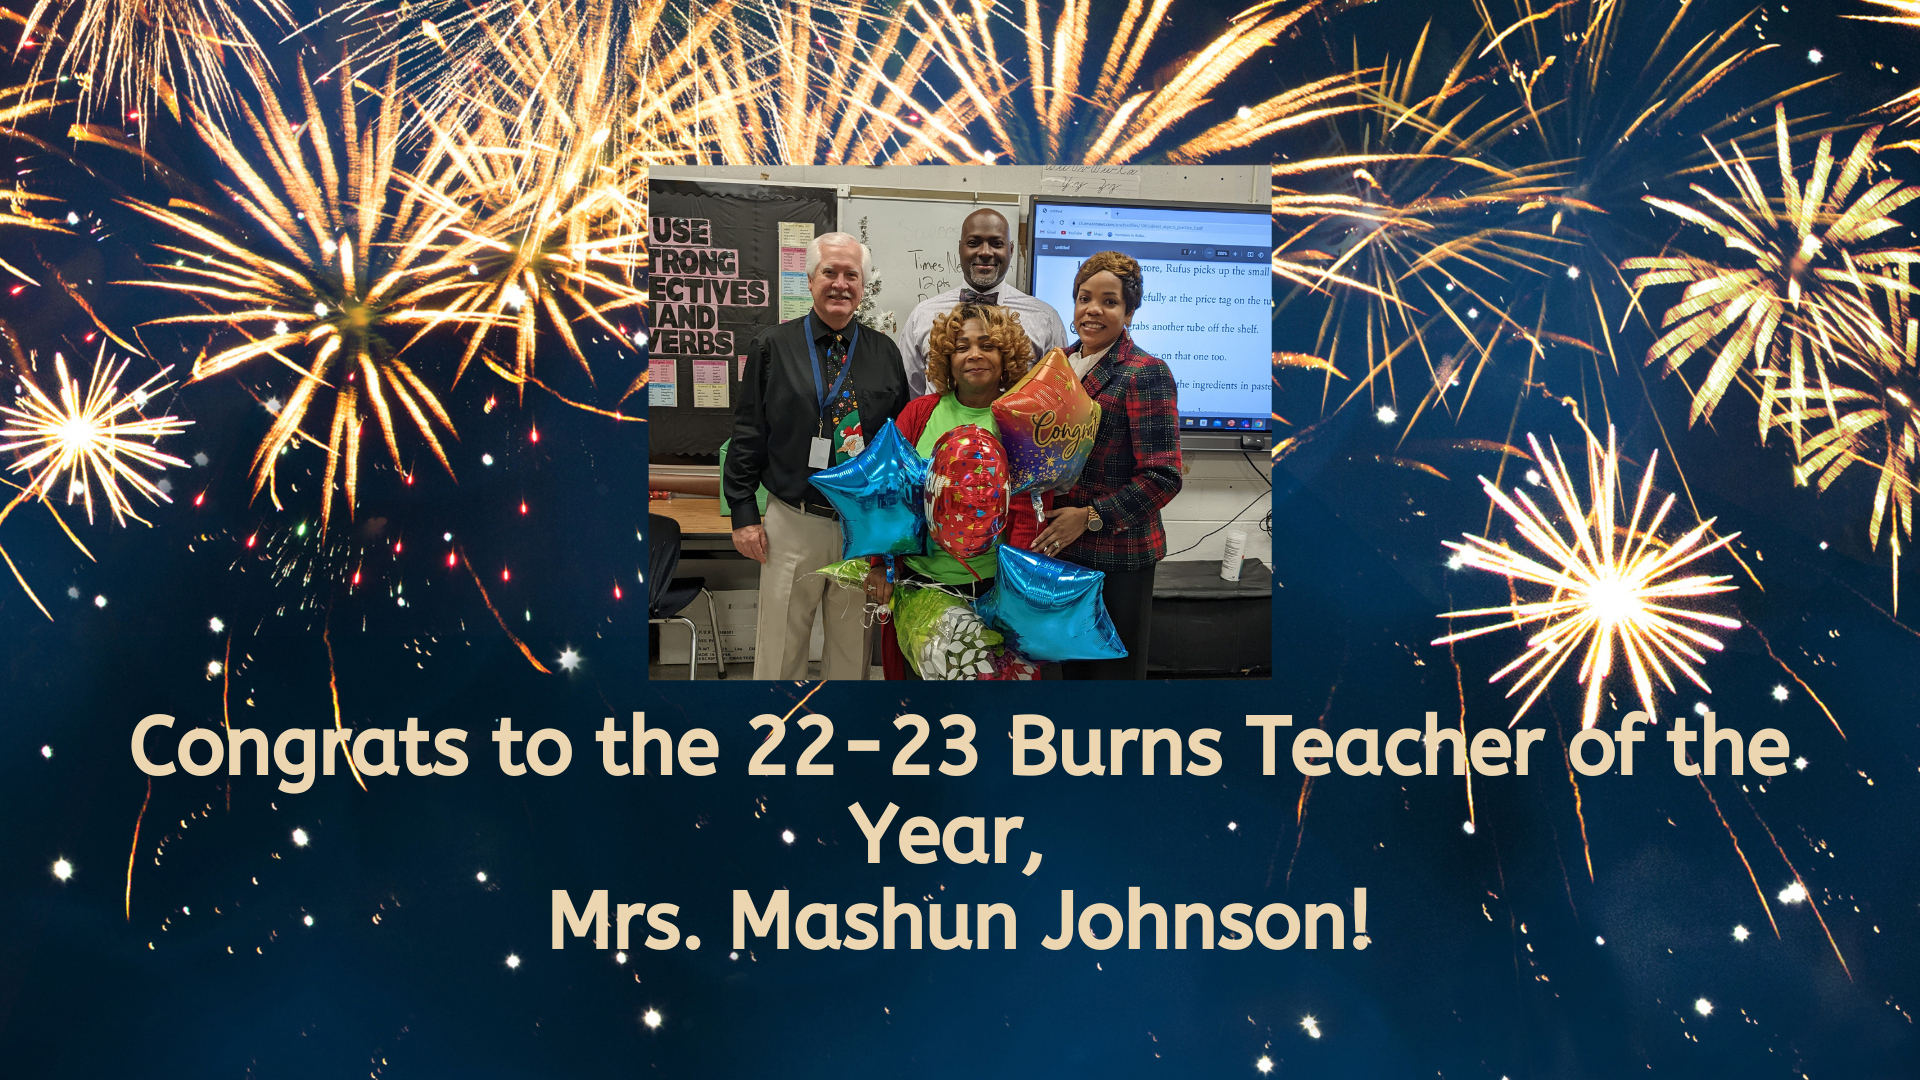 Congrats to the 22-23 Teacher of the Year for Burns Middle